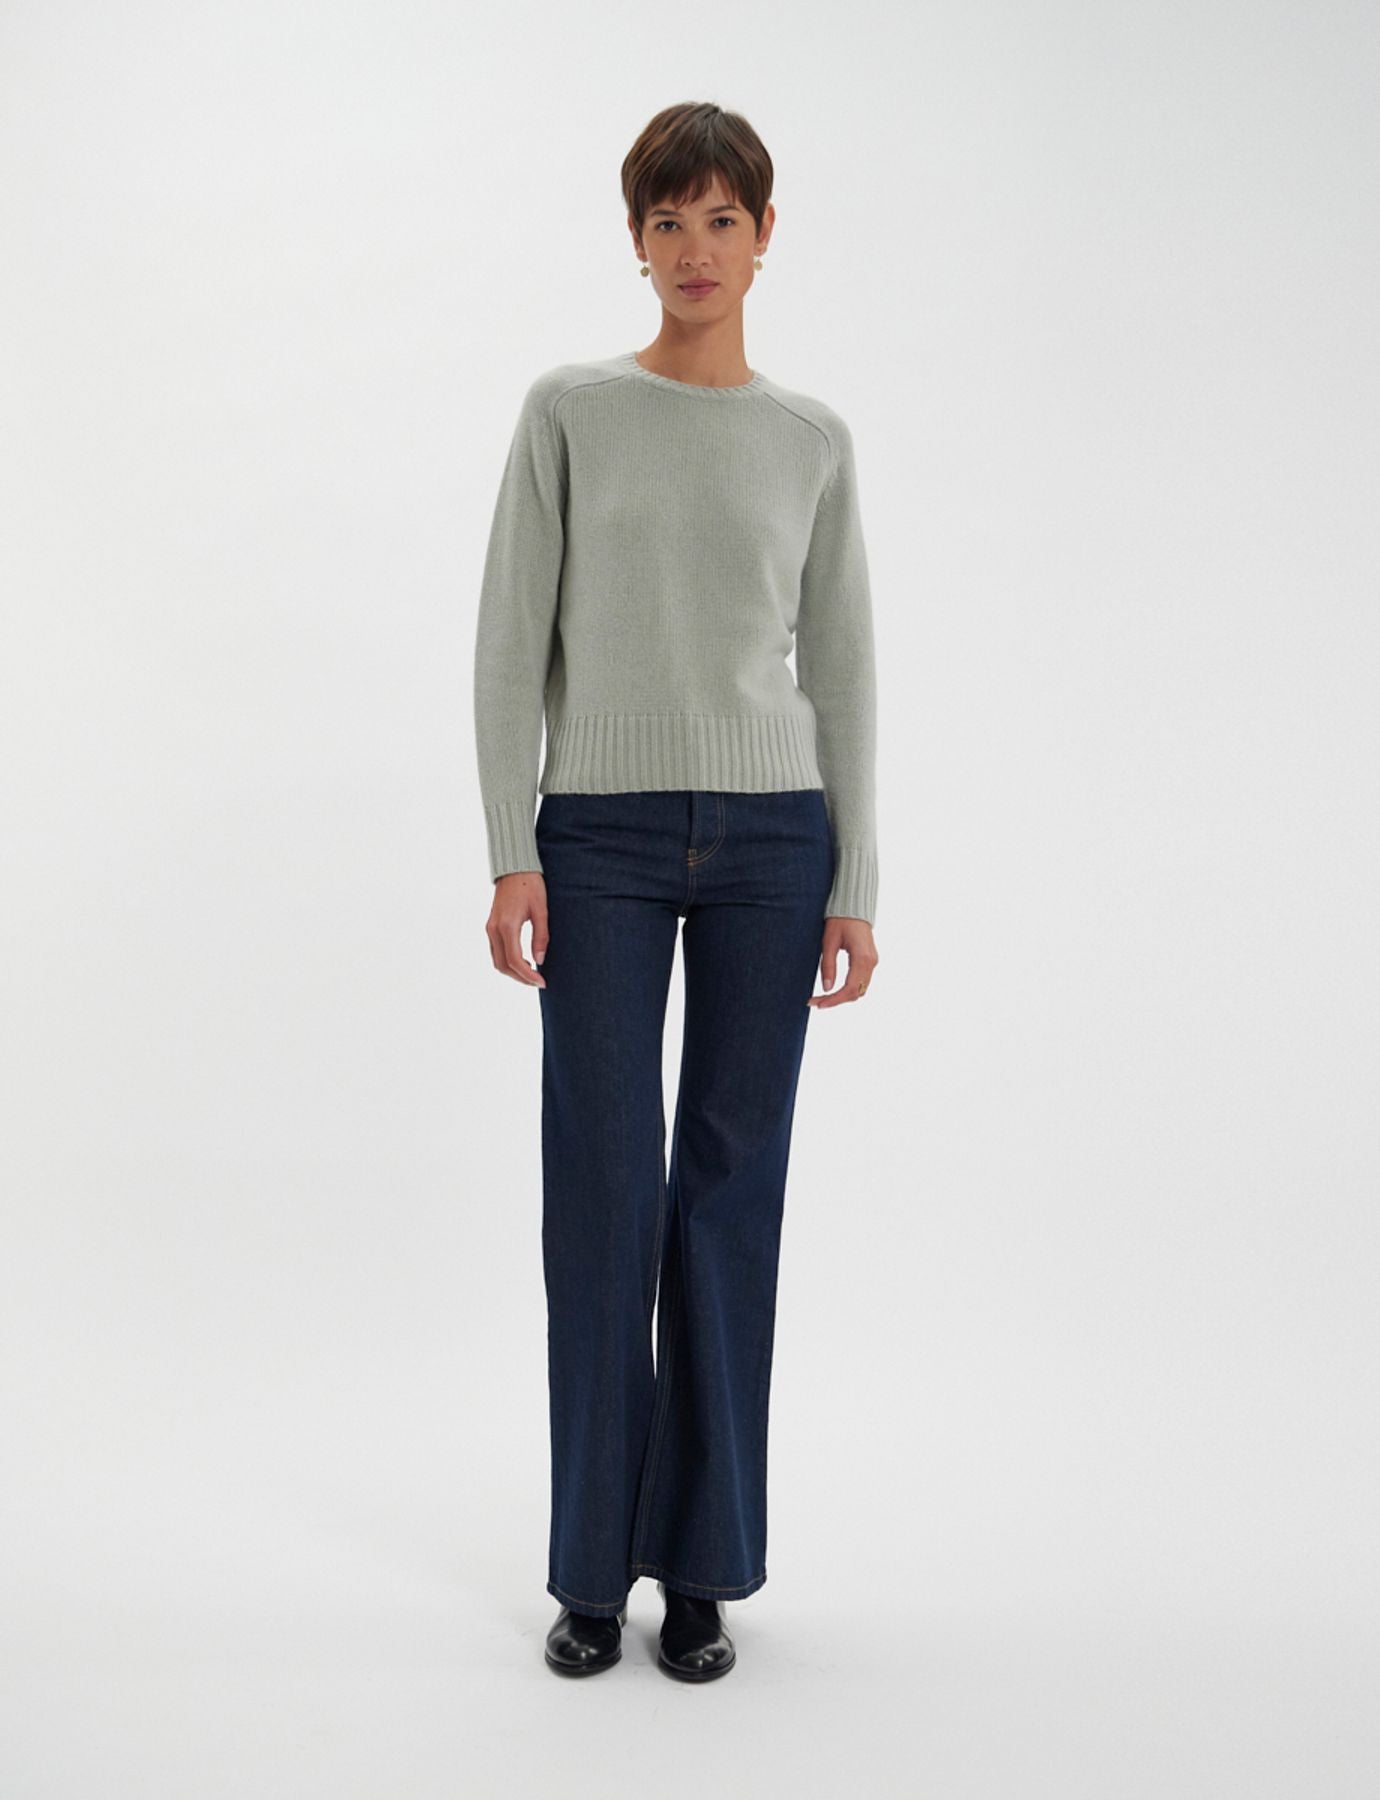 sweater-arthur-laine-and-cashmere-green-almond